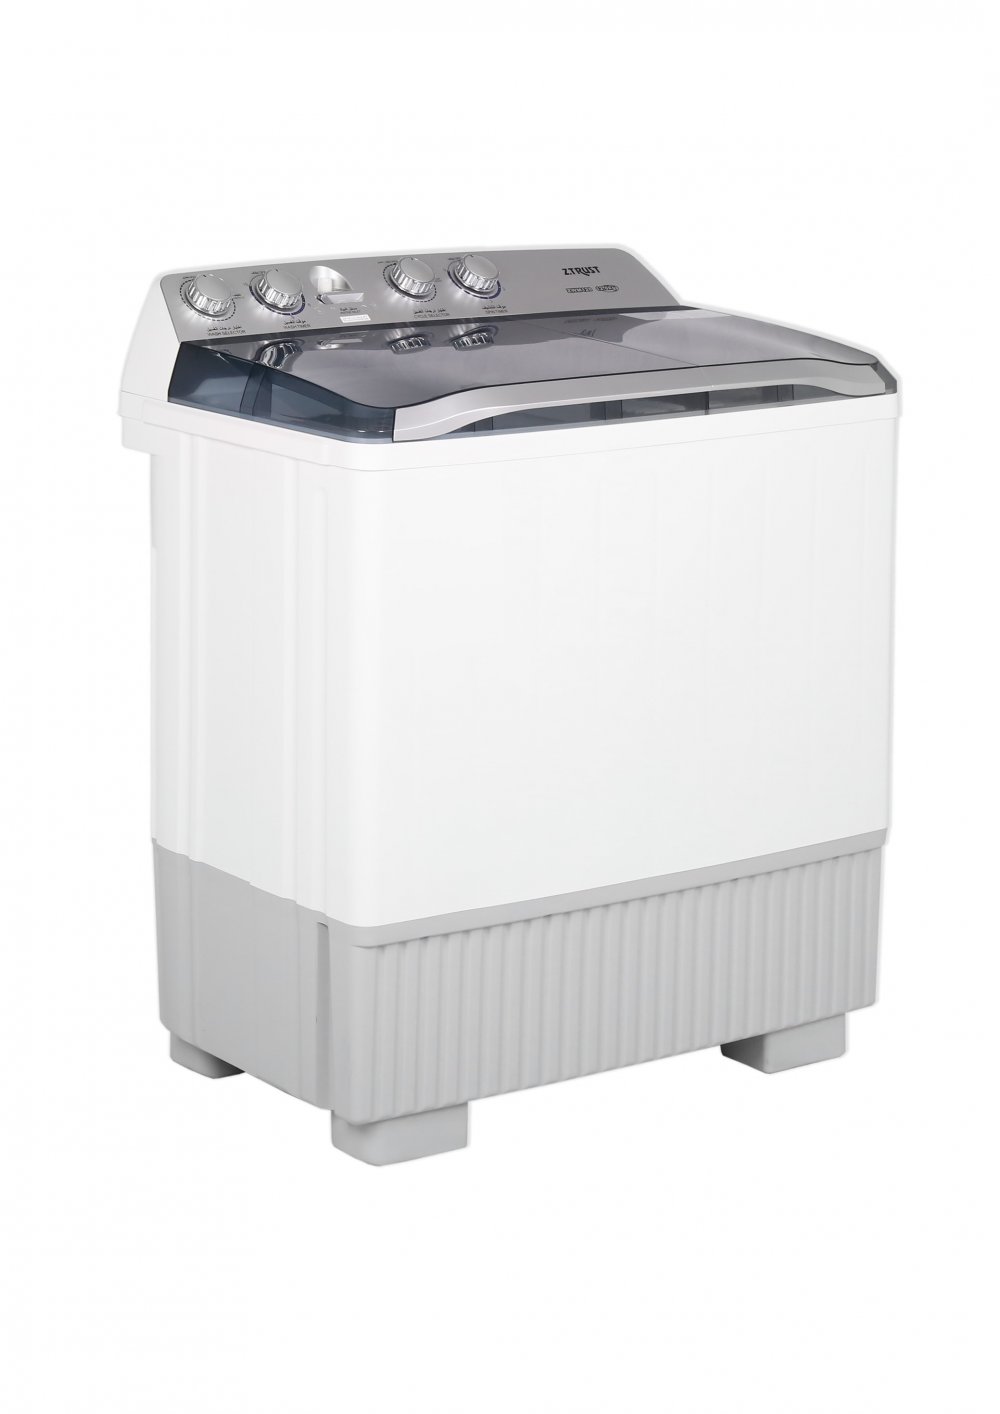 Twin/Top washer, 12K/W,7K/D